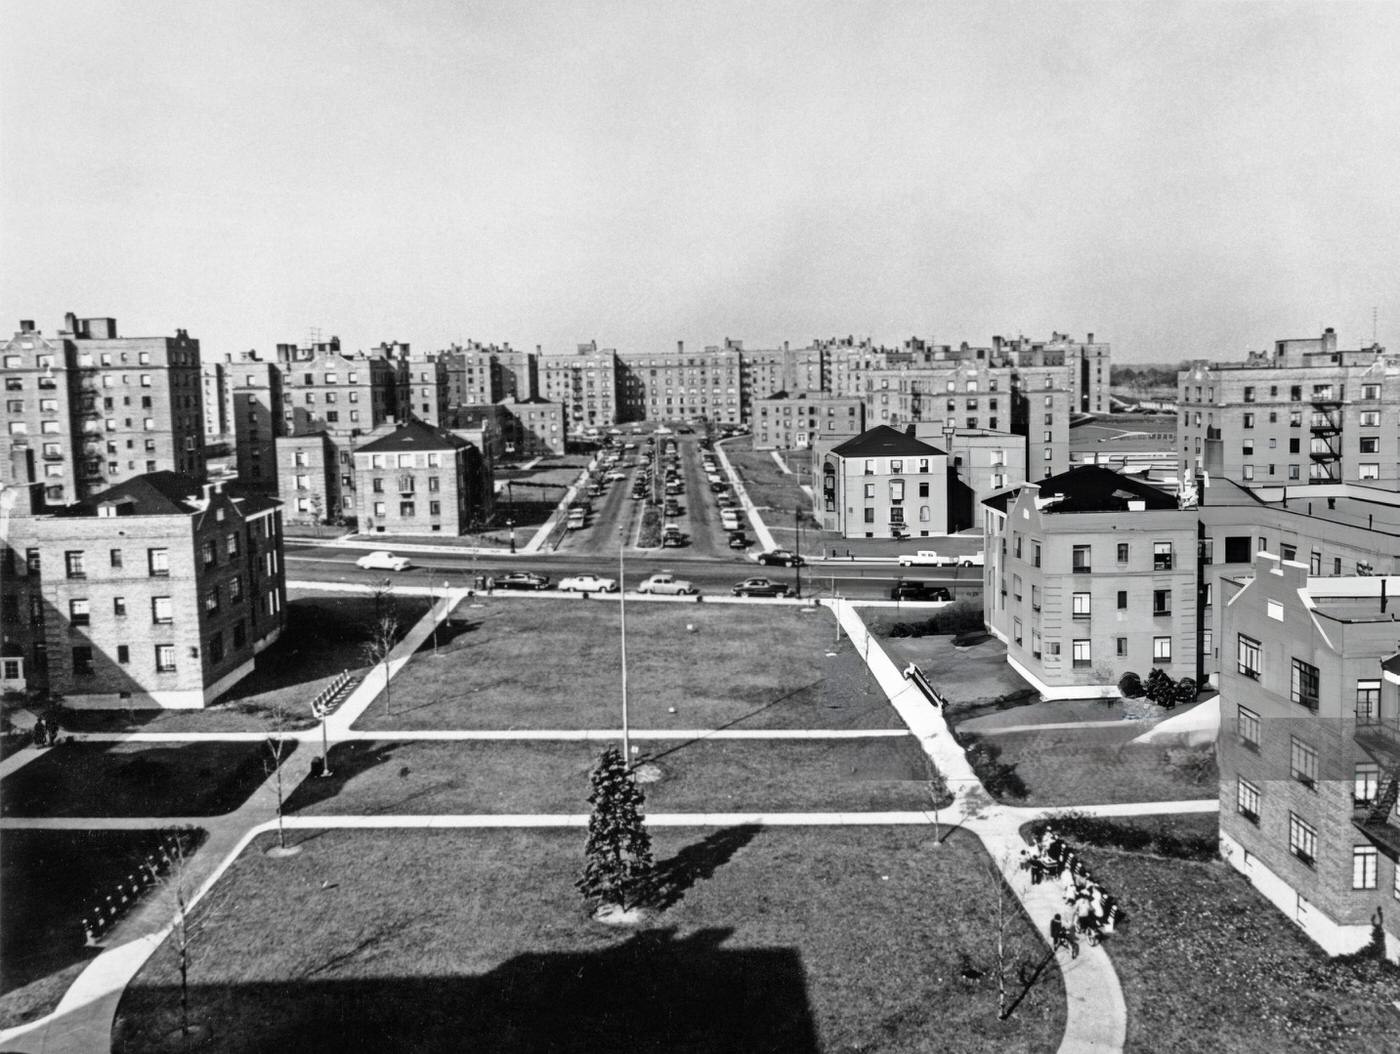 High Angle View Of A Housing Development In Flushing, Queens, New York City, 1950S.